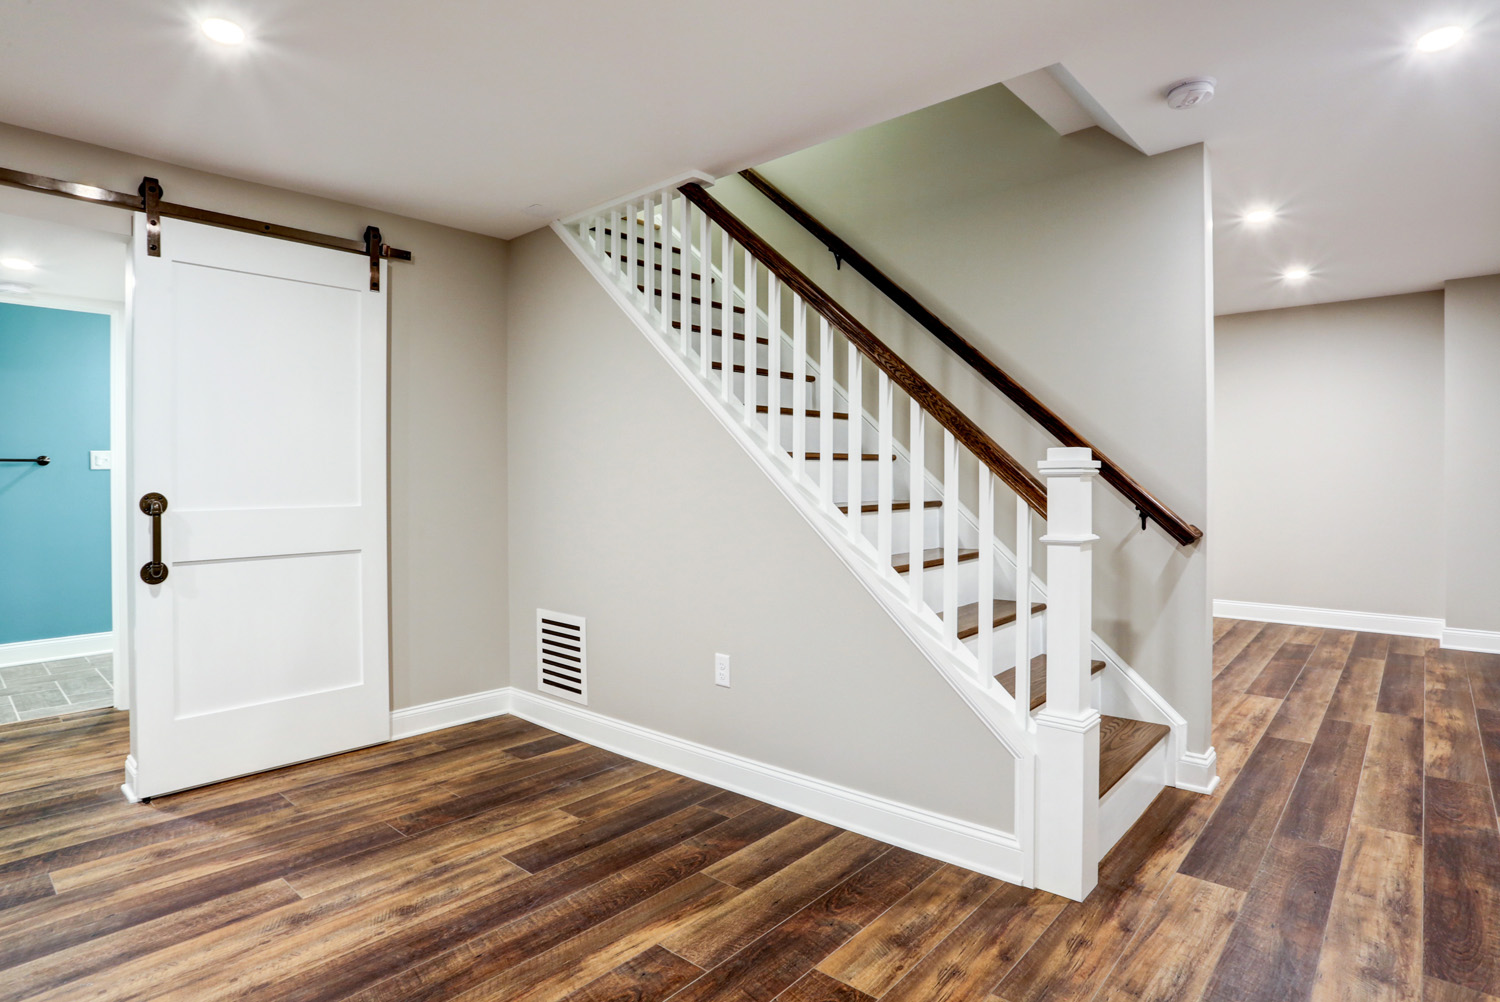 Lititz Basement Remodel with barn door and staircase